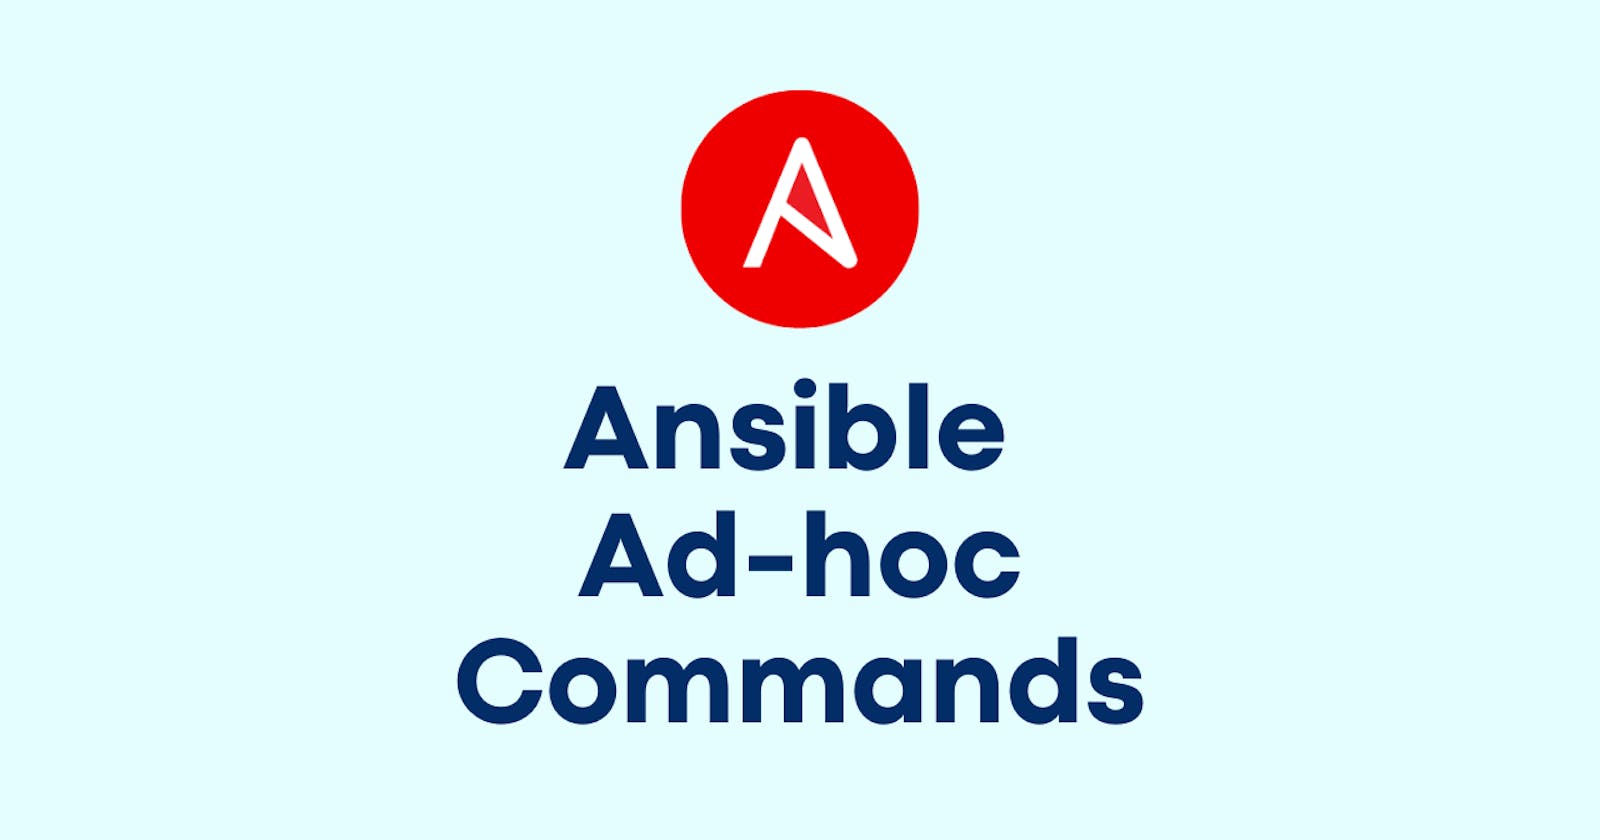 Day 56 - Understanding Ad-hoc commands in Ansible